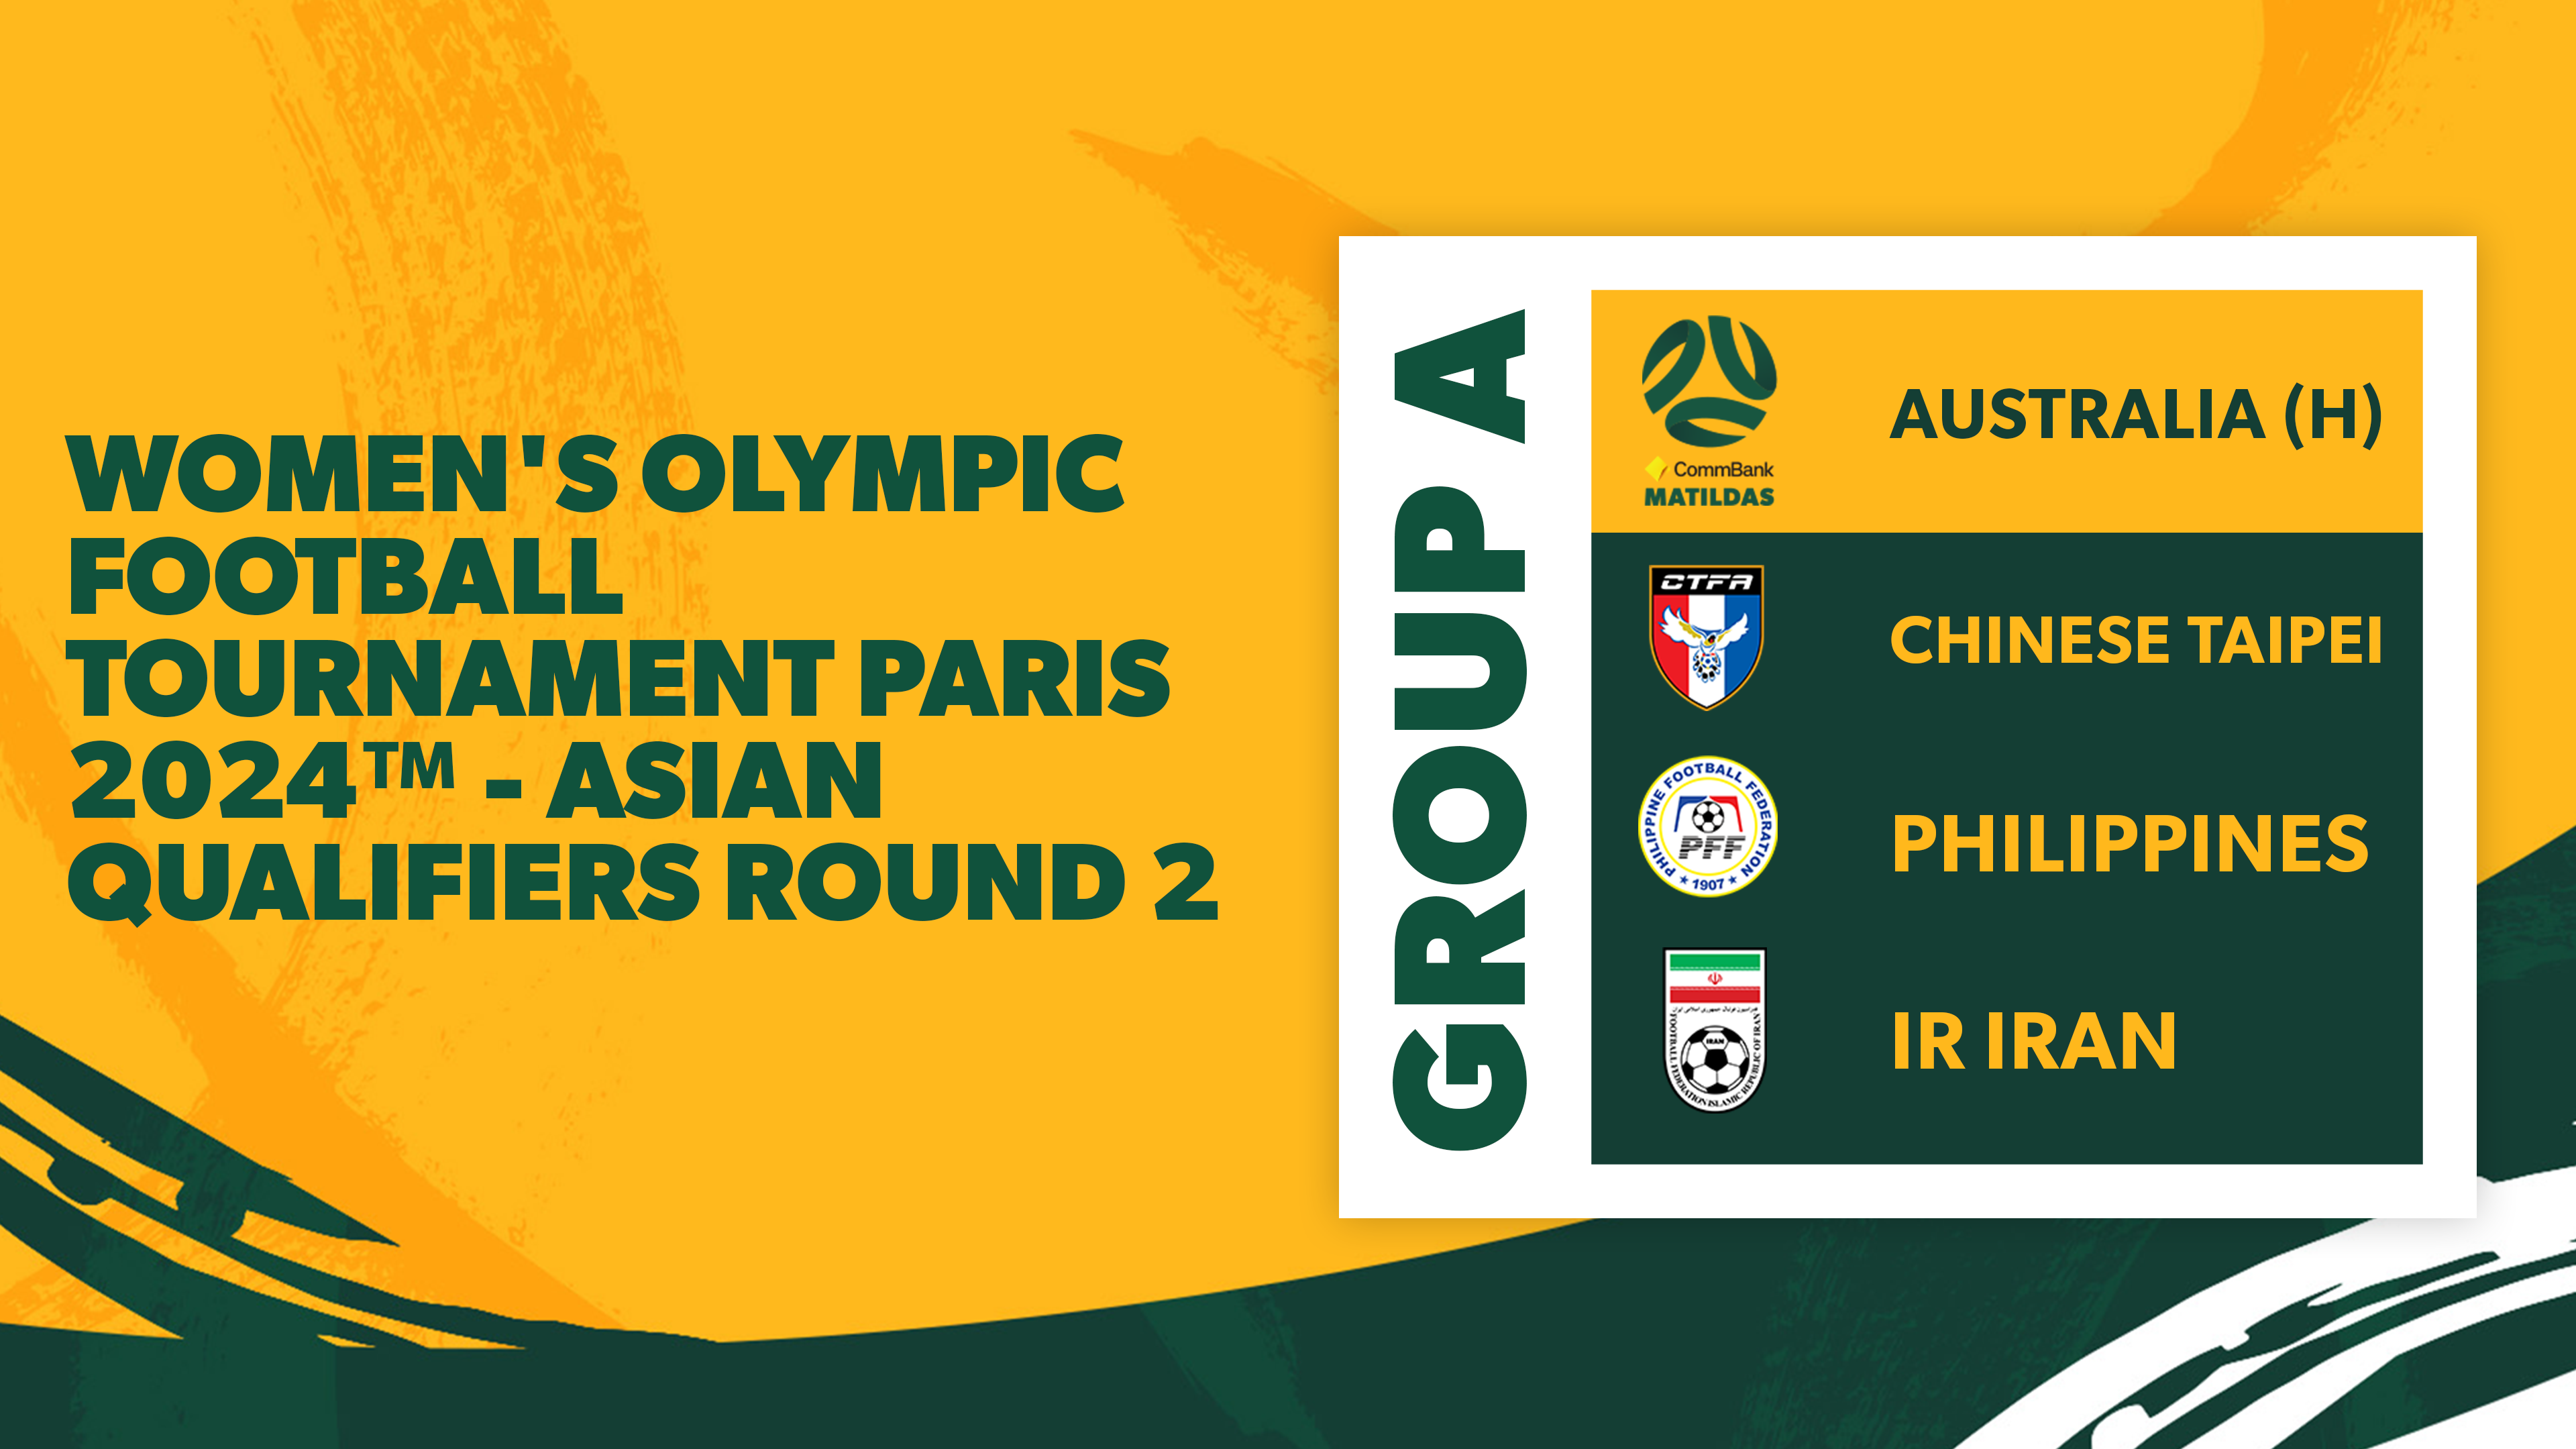 Australia's Group A Draw for the Women's Olympic Football Tournament Paris 2024™ Asian Qualifiers Round 2